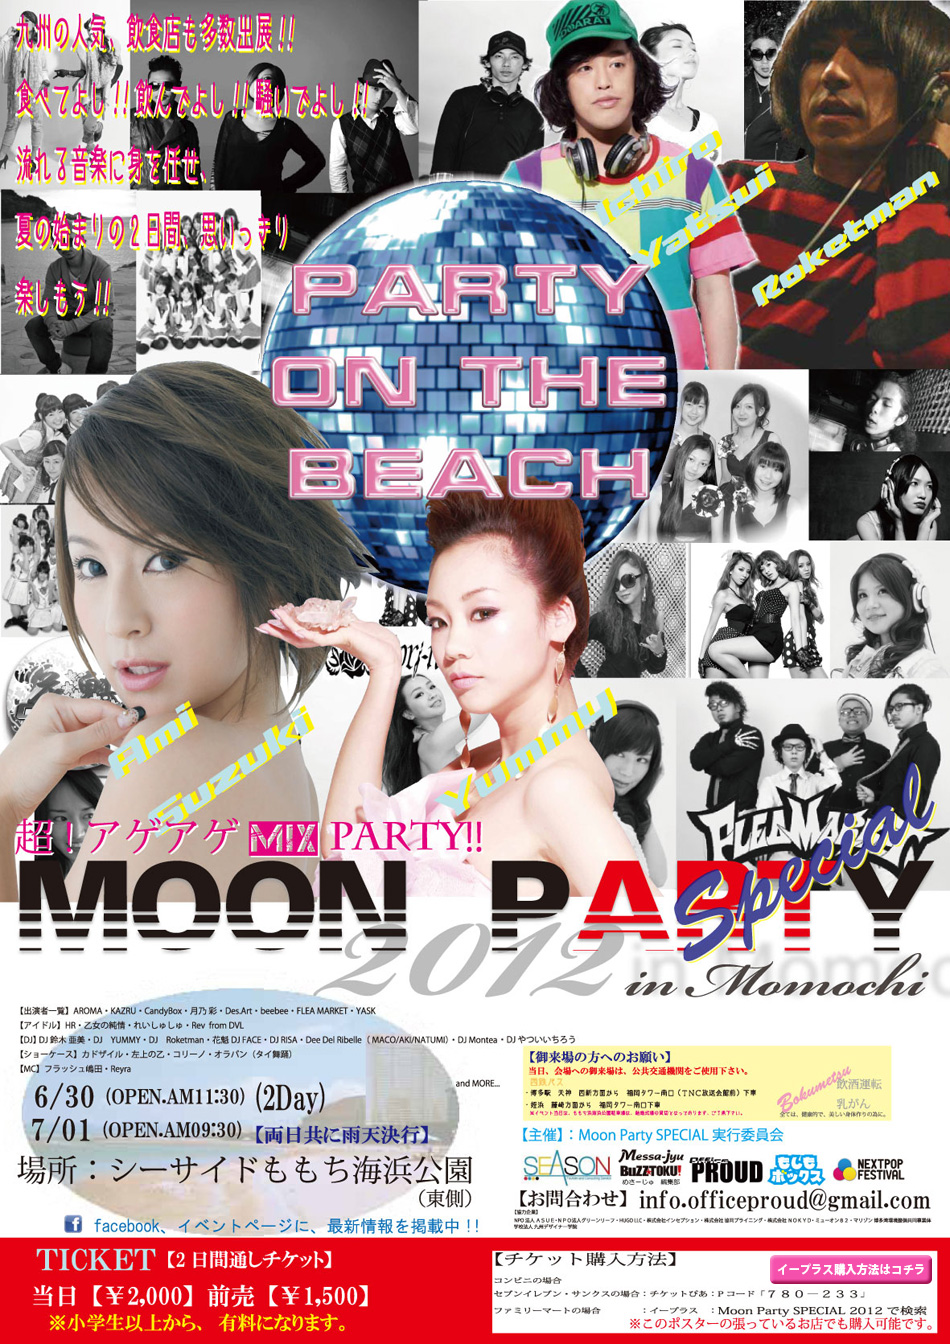 Moon Party2012Special in Momochi　夏始めの野外音楽イベント　6月30日・7月1日　2日間通しチケット前売り1500円当日2000円